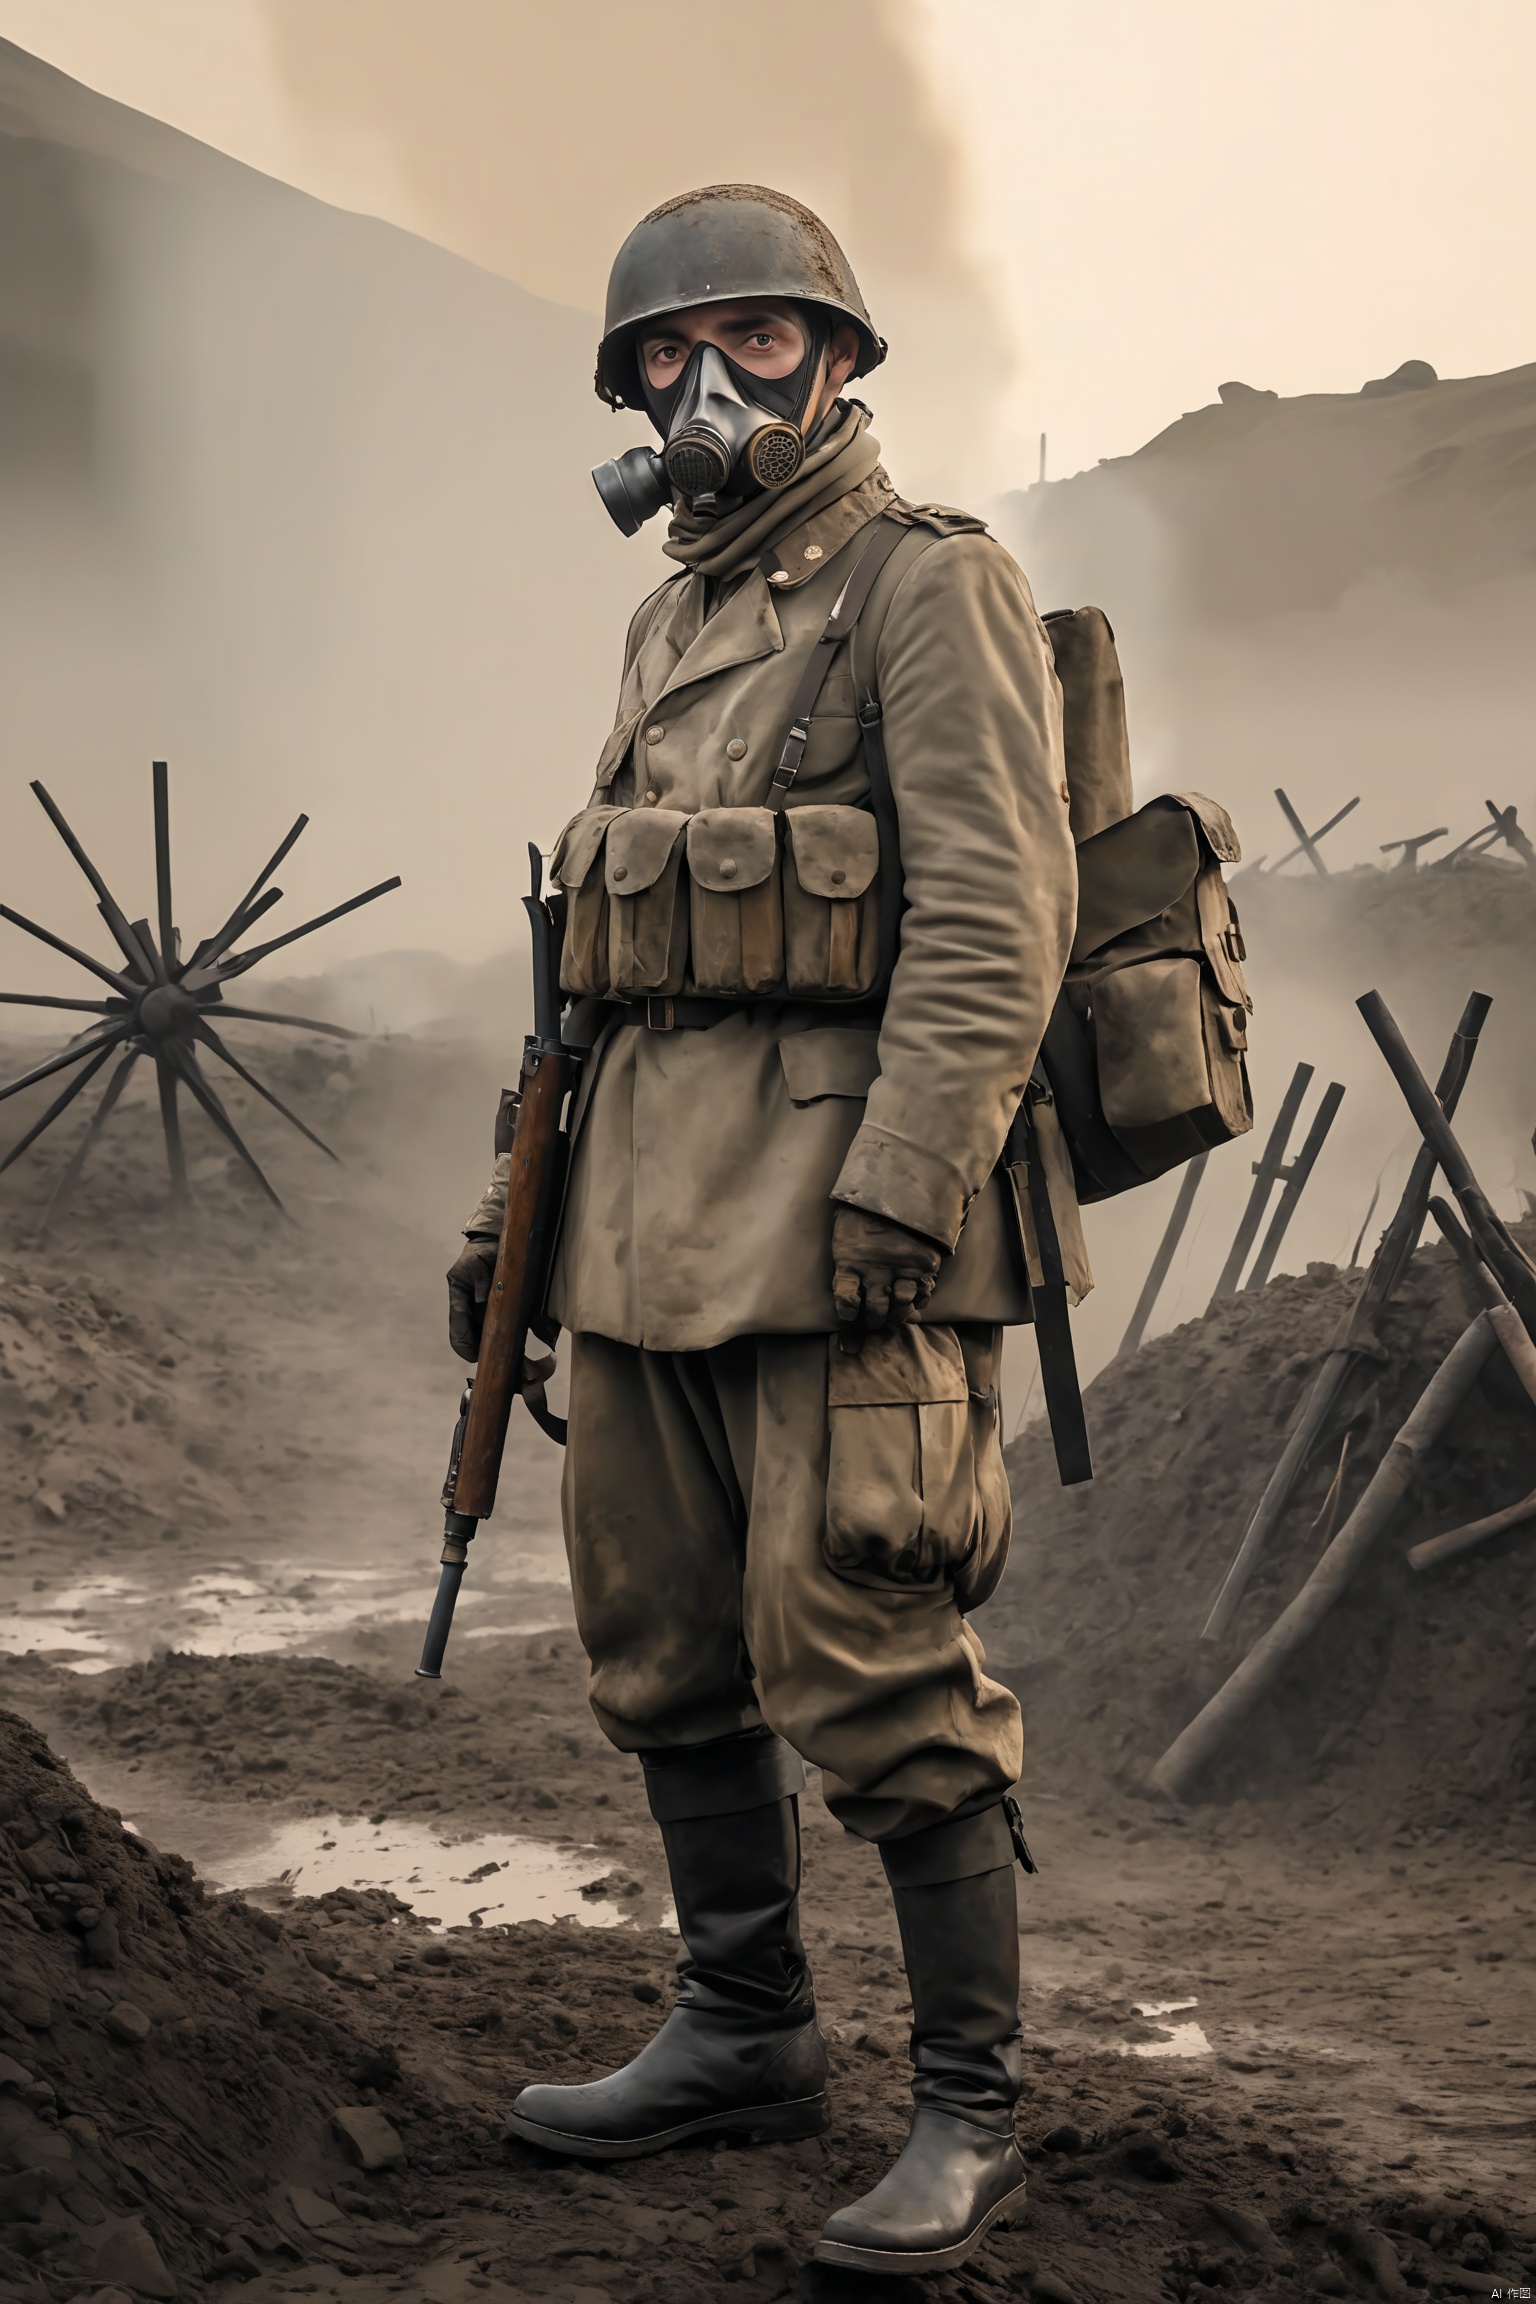  (WWI German soldier: 1.0), solo, firearms, dirt, smoke, dust, trench warfare scene, gas mask, retro military uniform, mud, rusty bayonet, barbed wire barrier, worn boots with characteristic spikes Steel helmet, weathered face, tired eyes, trench, khaki military uniform texture, battlefield background, battlefield dusk, movie scene, movie shot, cinematic lighting, volumetric lighting, hyper-detailed, highly detailed, ultra-detailed, realistic, hyper Realistic, surreal, HD, IMAX, 8K resolution, super resolution, sharp focus, grandeur, best quality, masterpiece., Professional